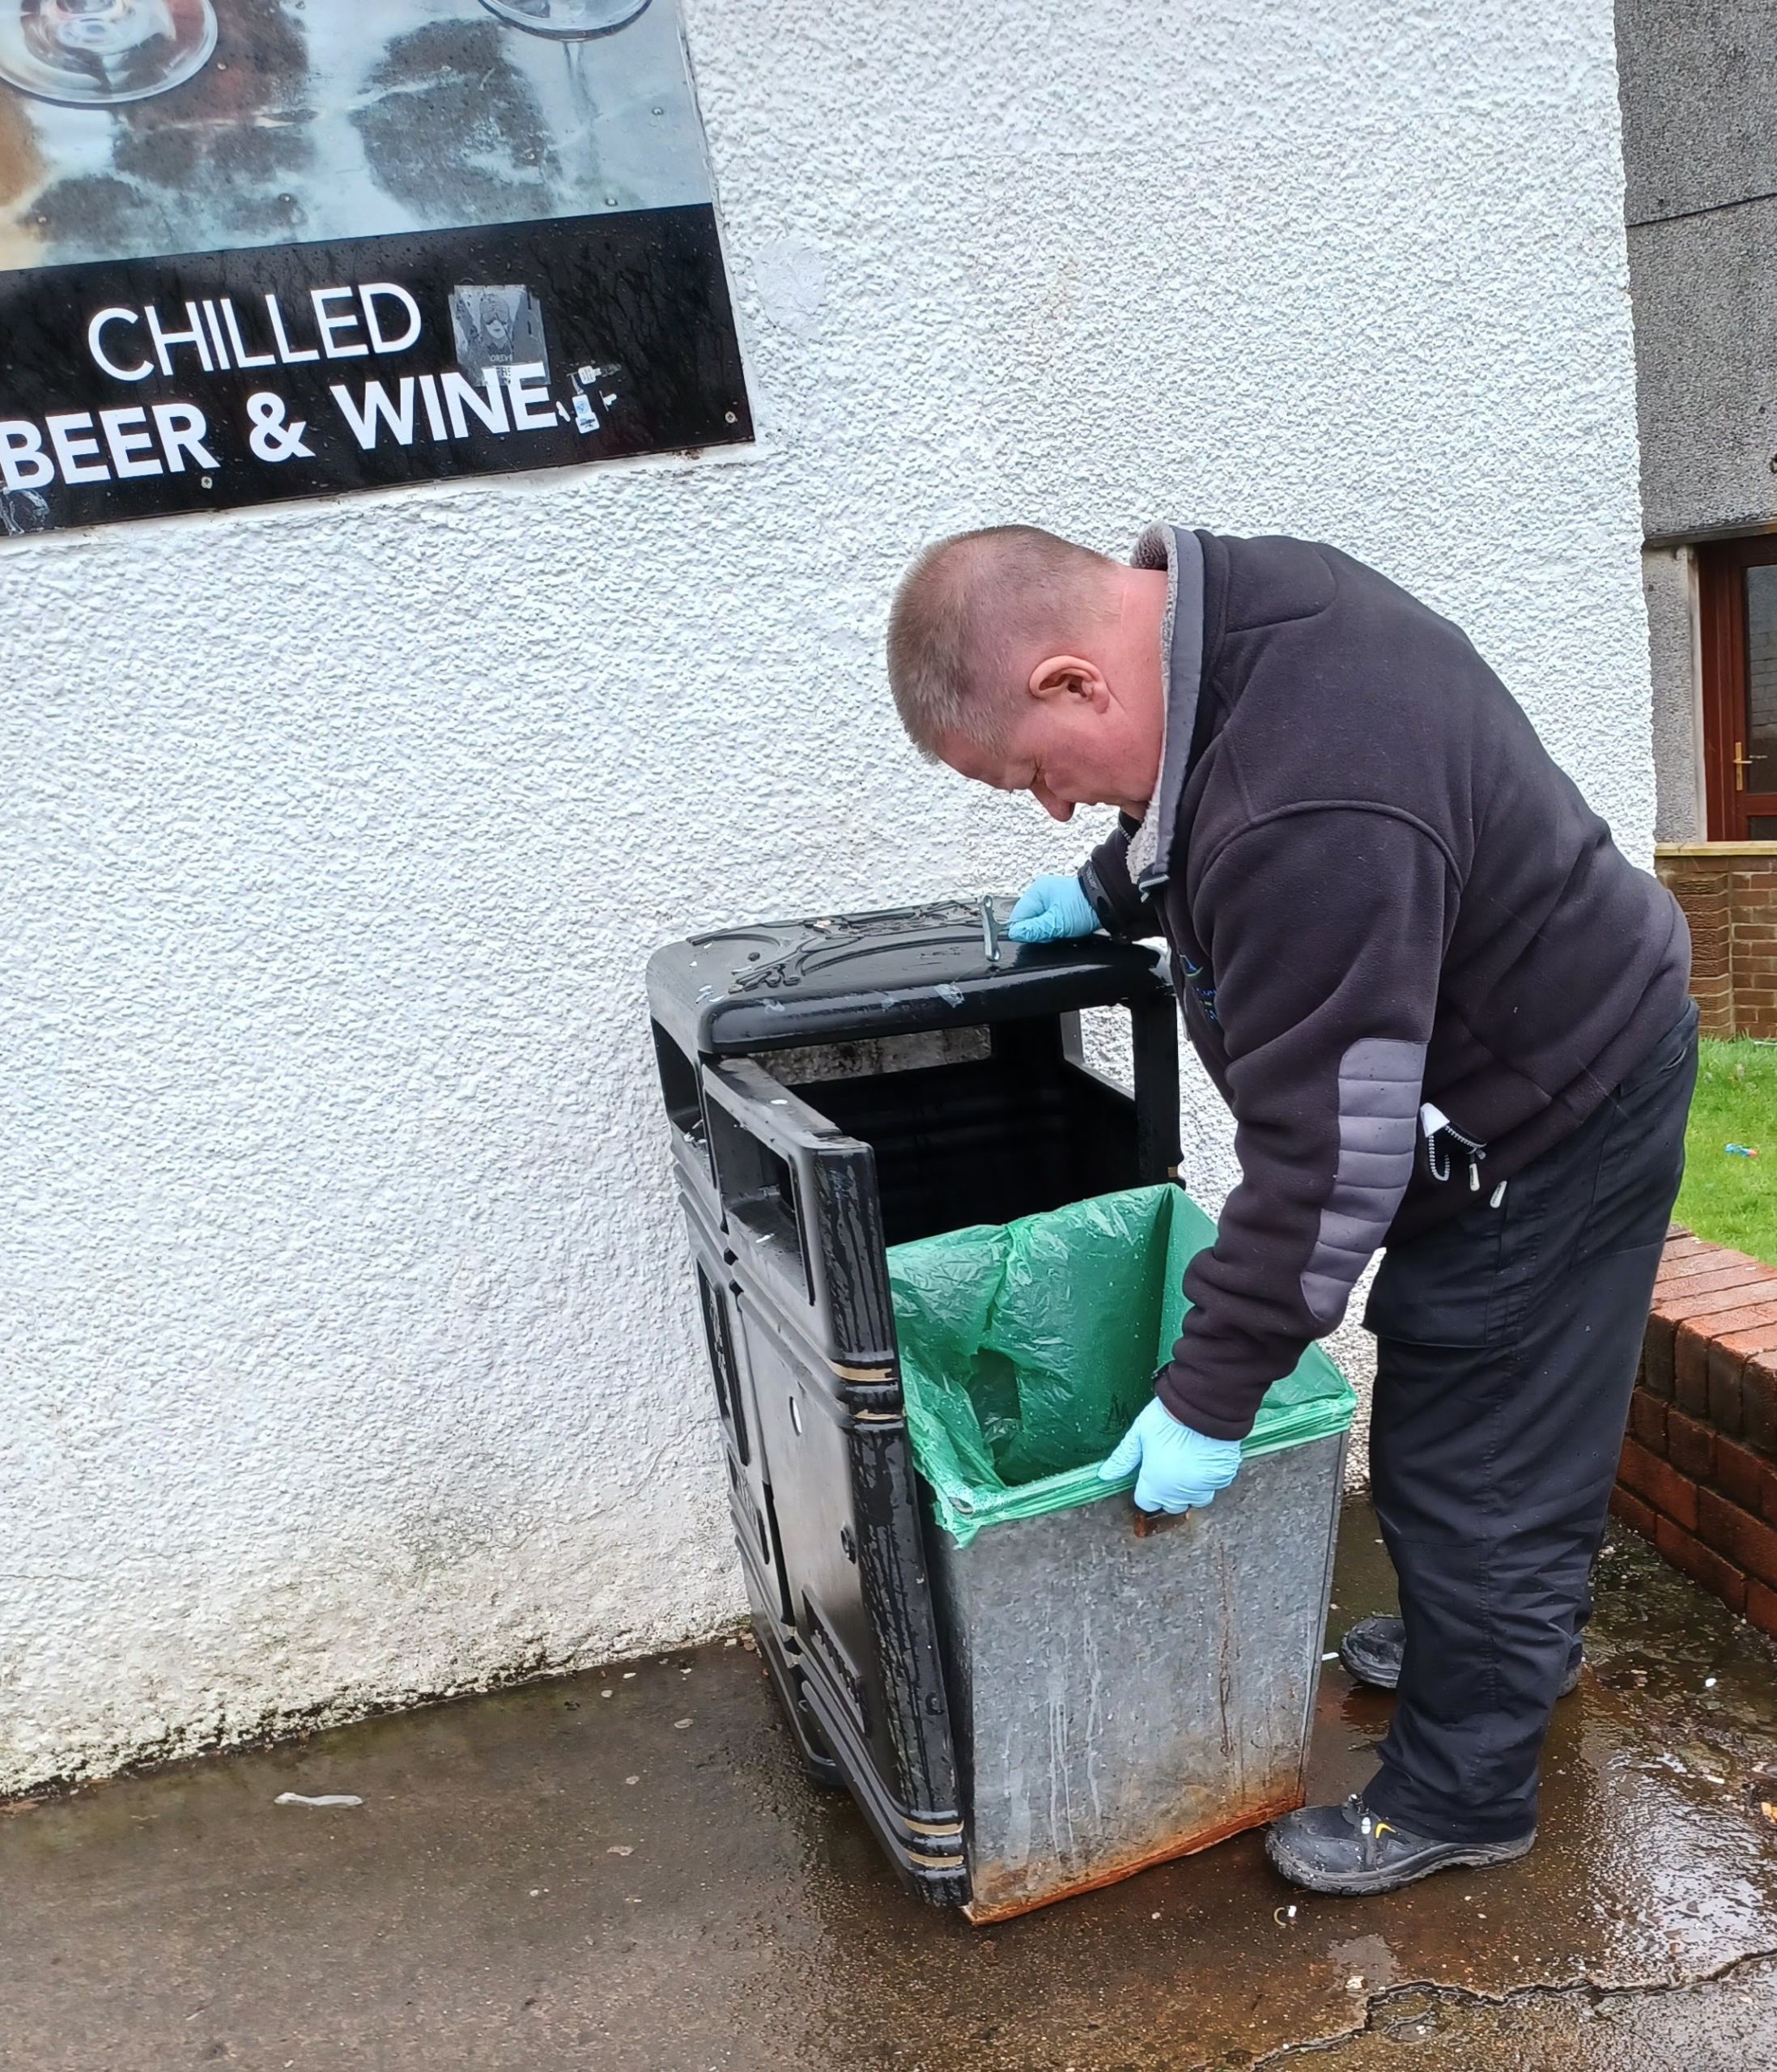 John Dunlop, Environmental Enforcement Officer, has been encouraging people to use public bins responsibly